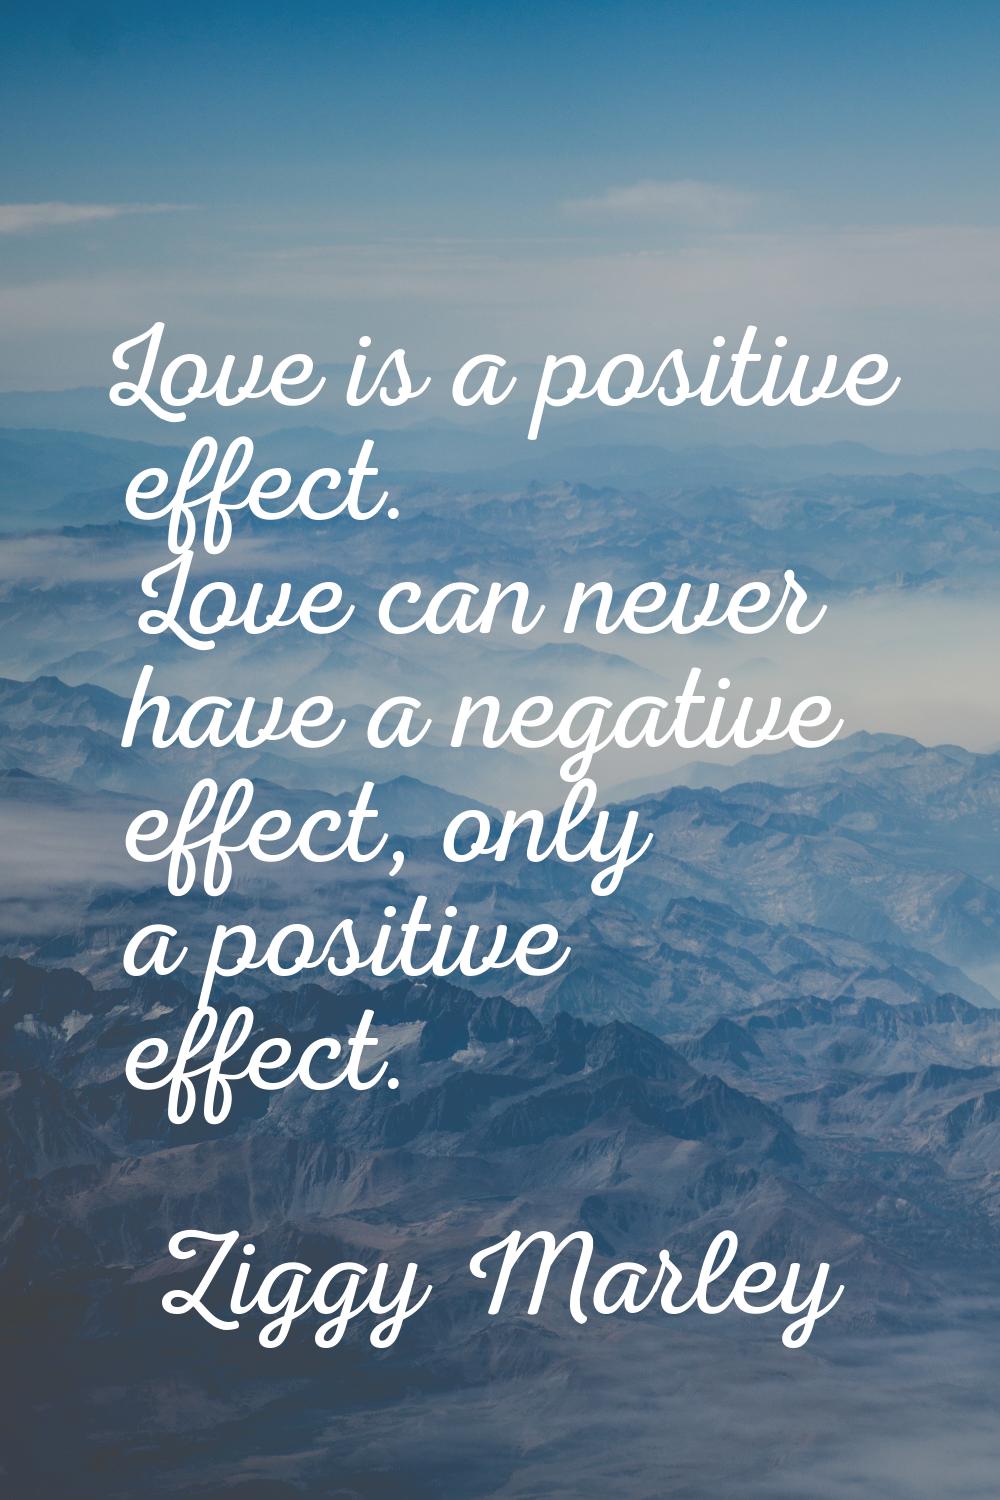 Love is a positive effect. Love can never have a negative effect, only a positive effect.